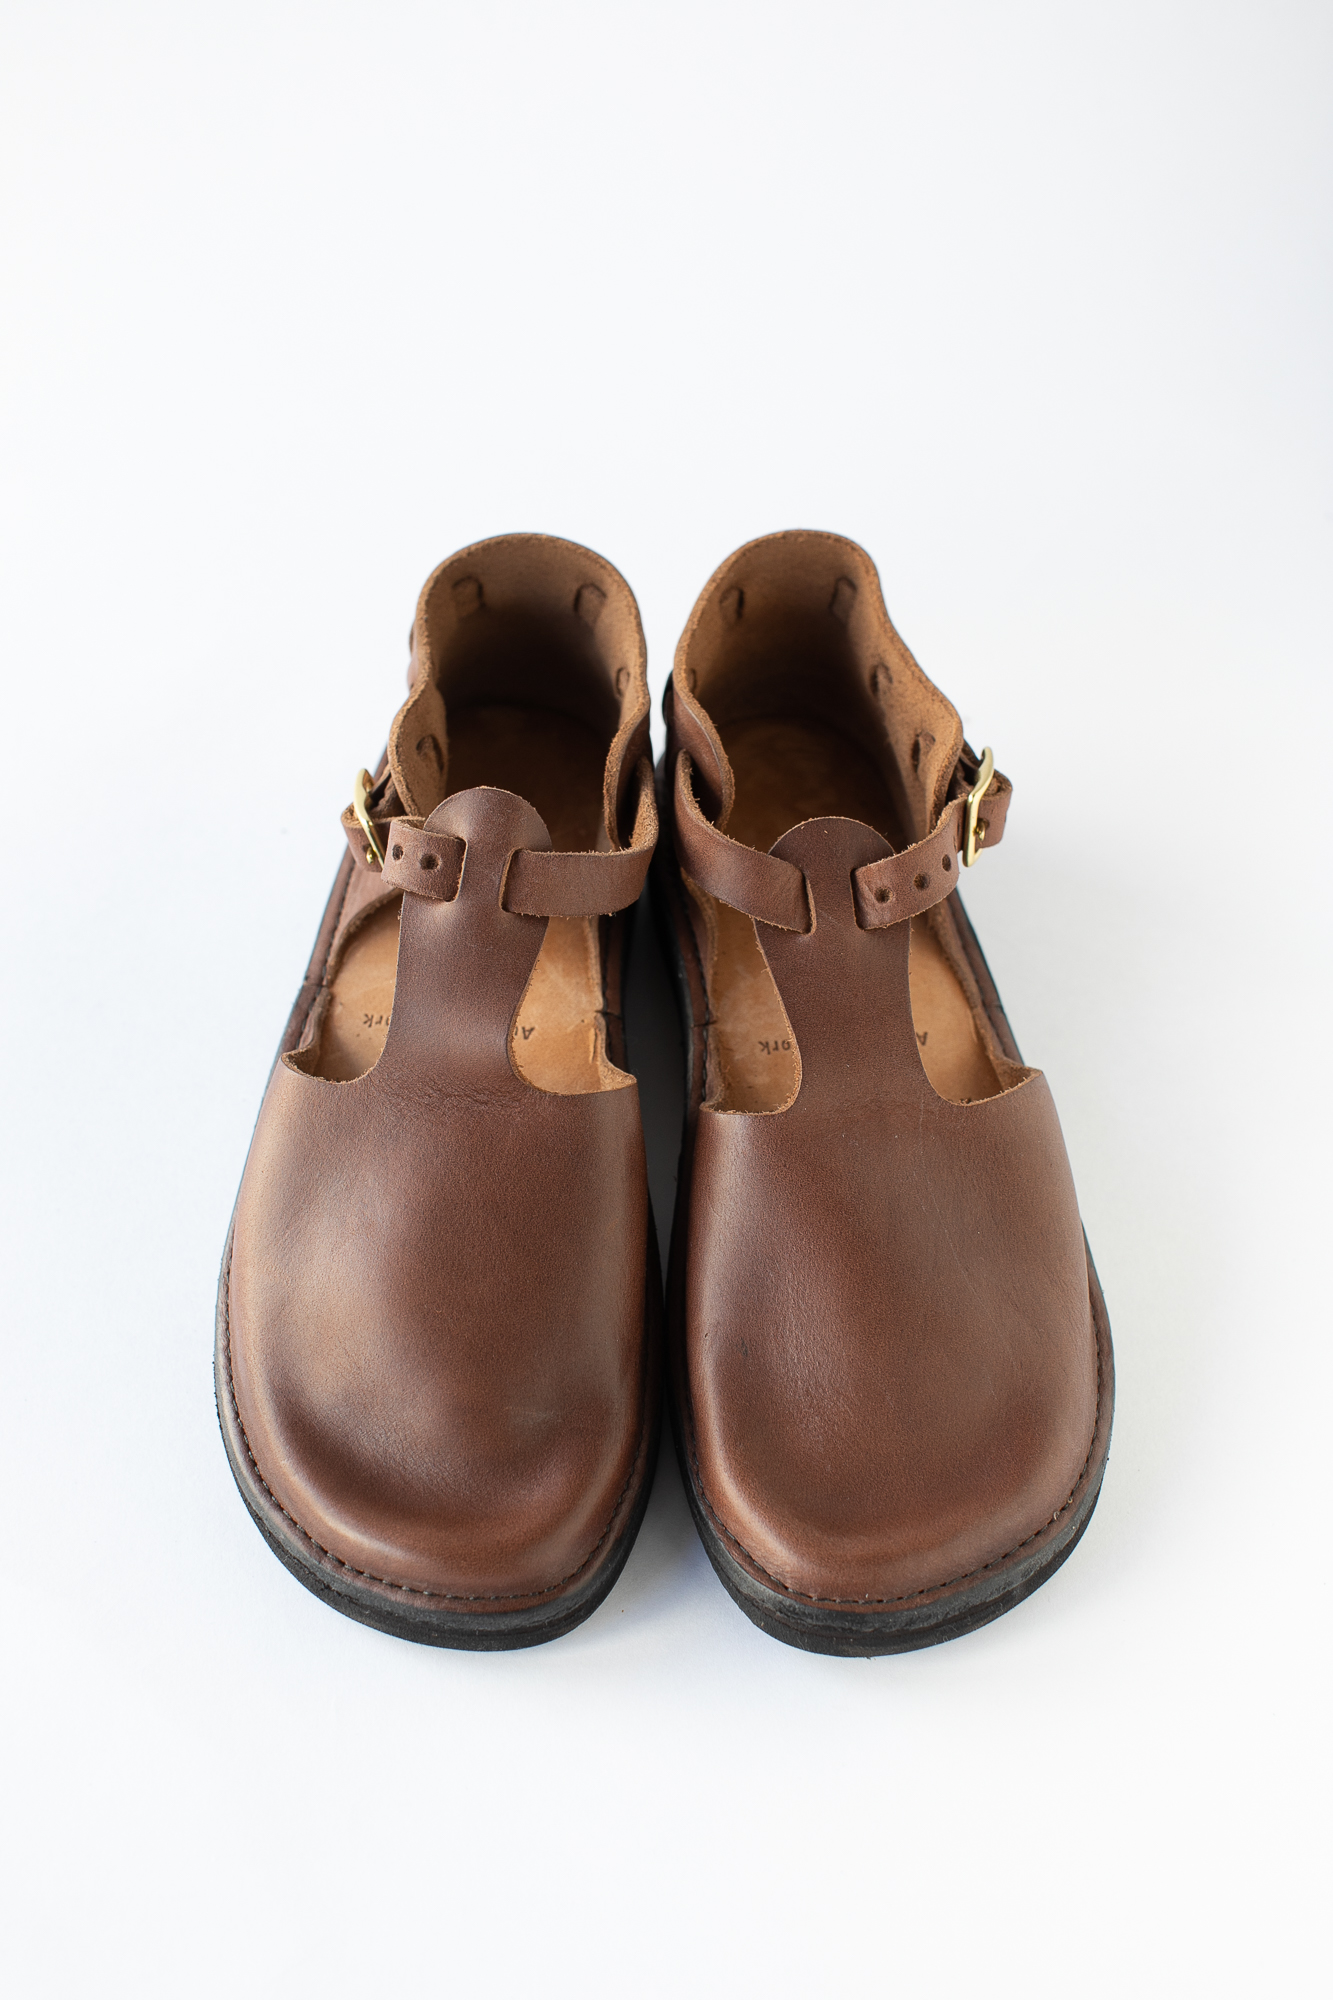 Aurora Shoes West Indian - SUSCON + RUSTIC HOUSE ONLINESTORE